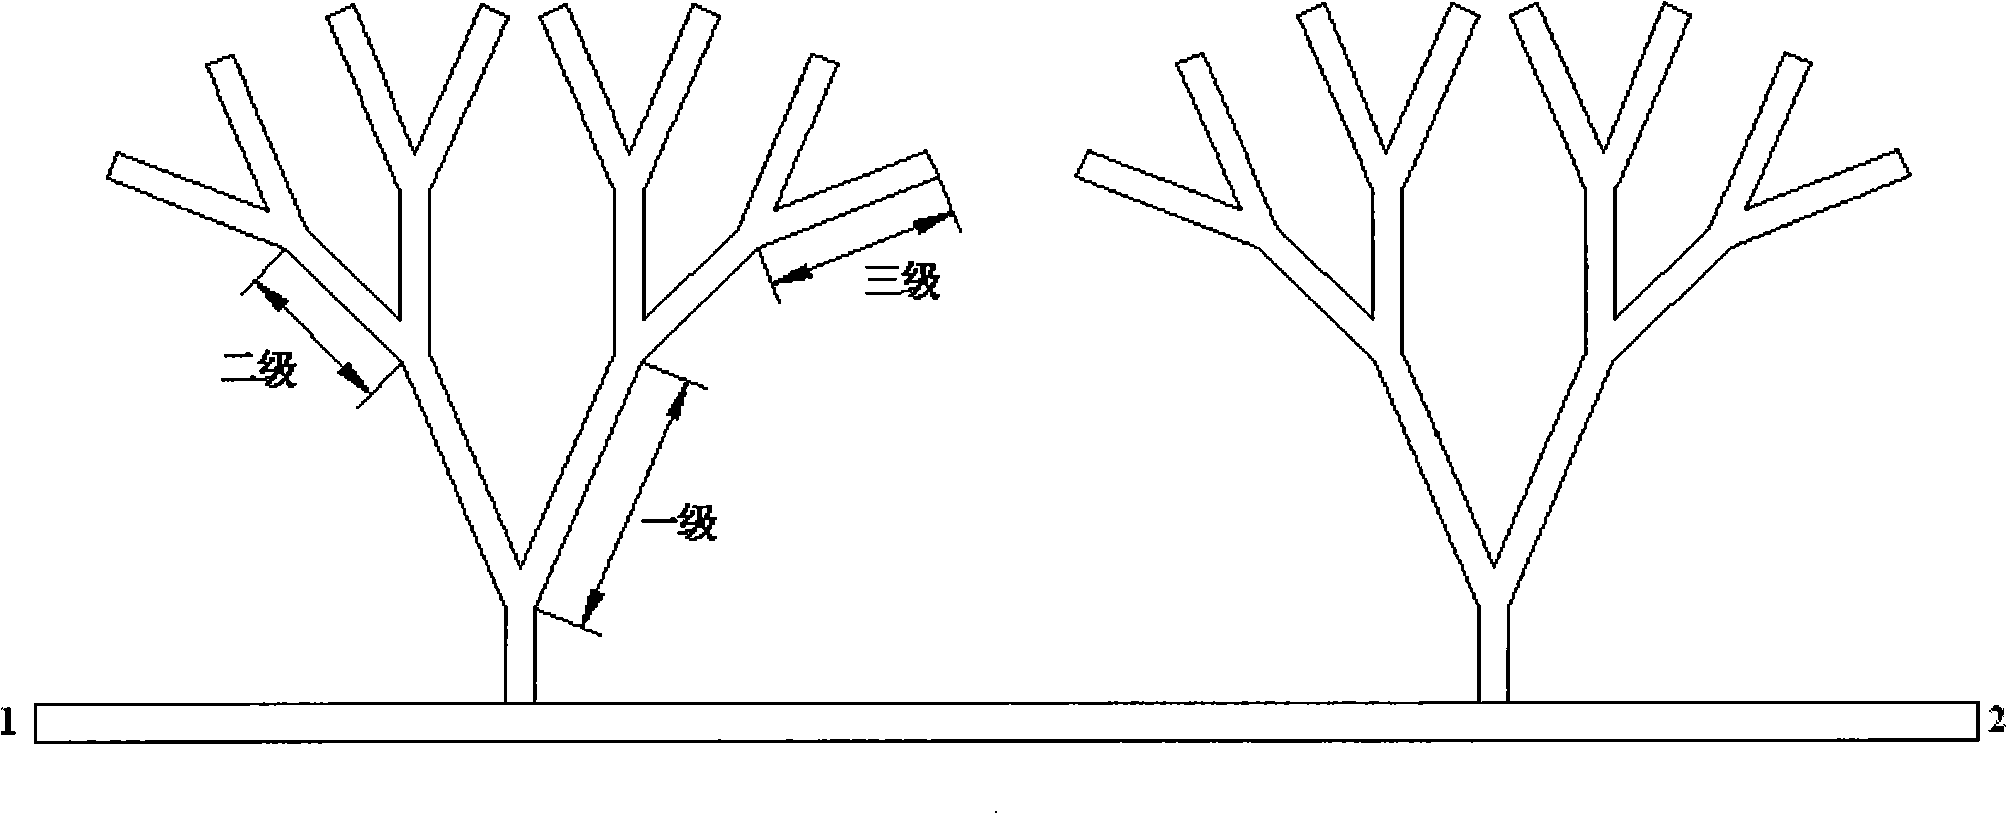 Microwave band-elimination filter based on tree shaped microstrip line construction